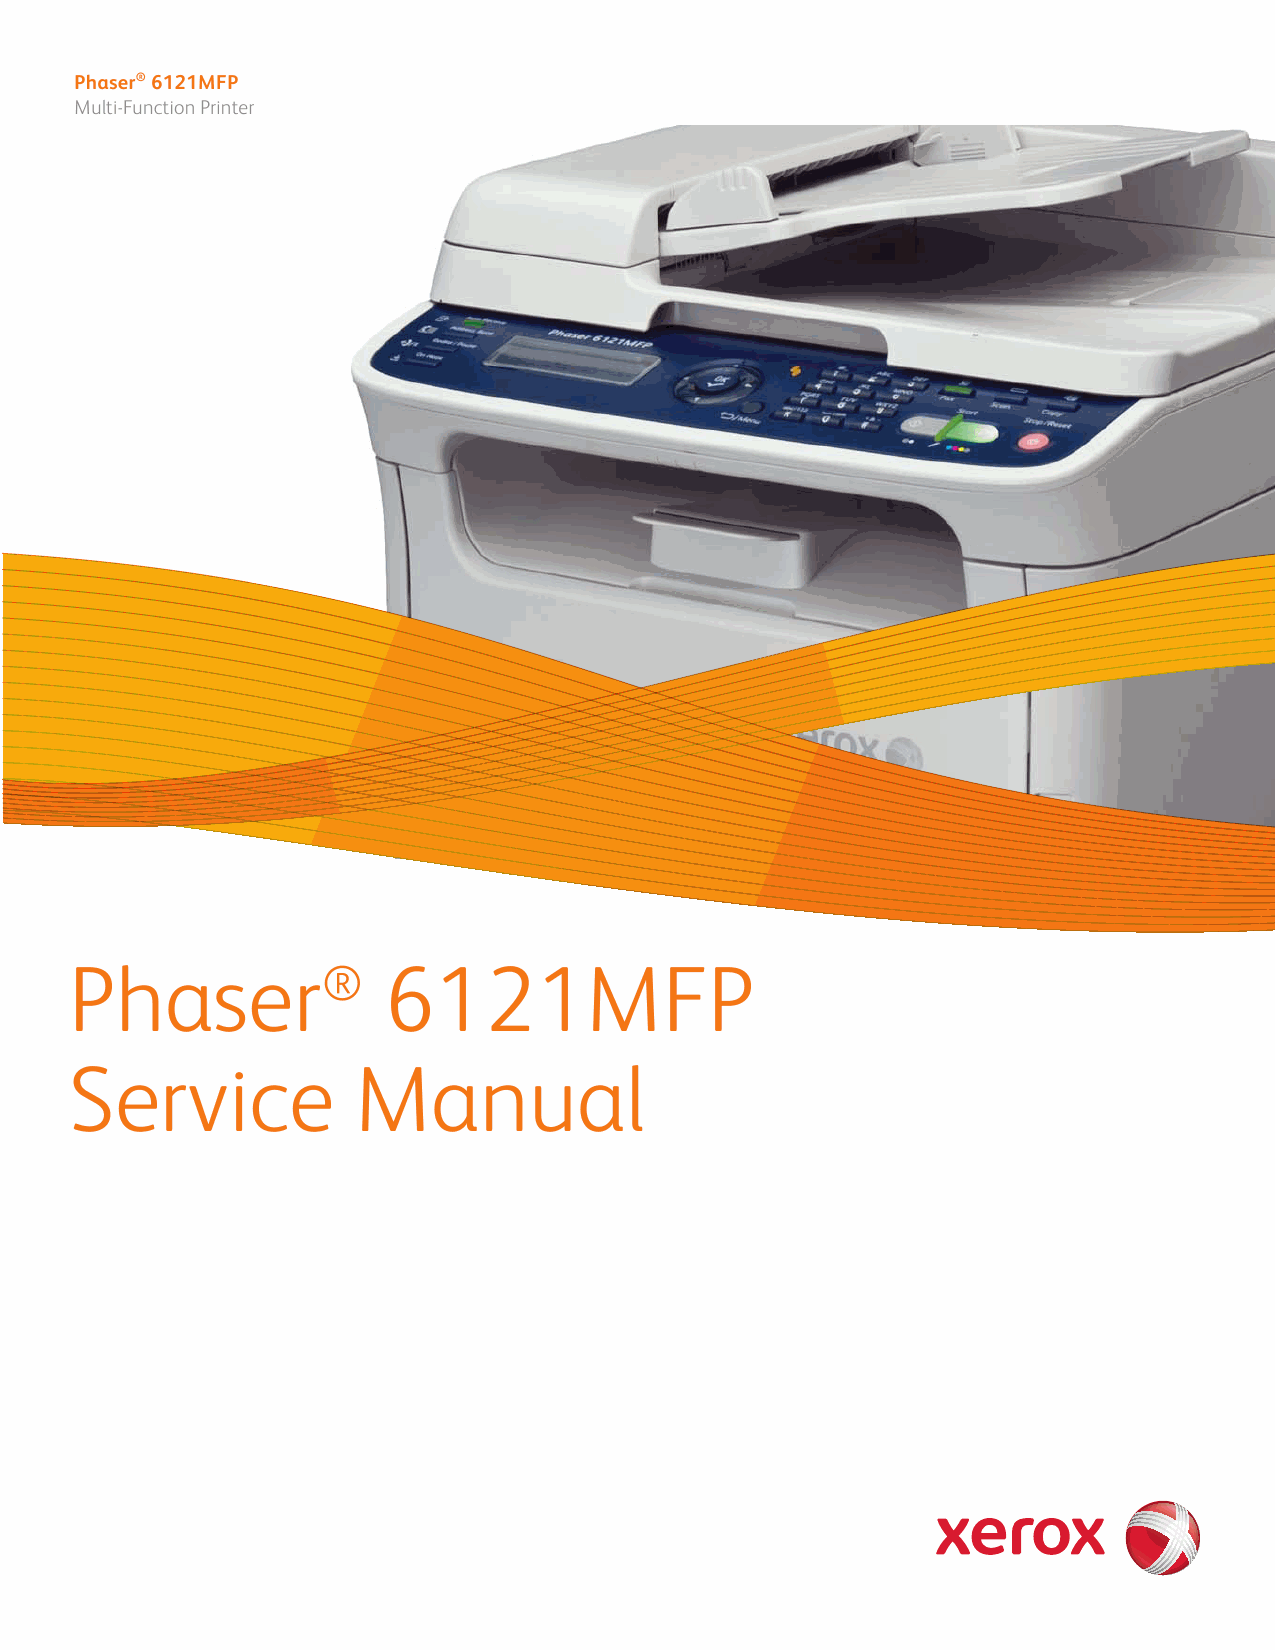 Xerox Phaser 6121-MFP Parts List and Service Manual-1